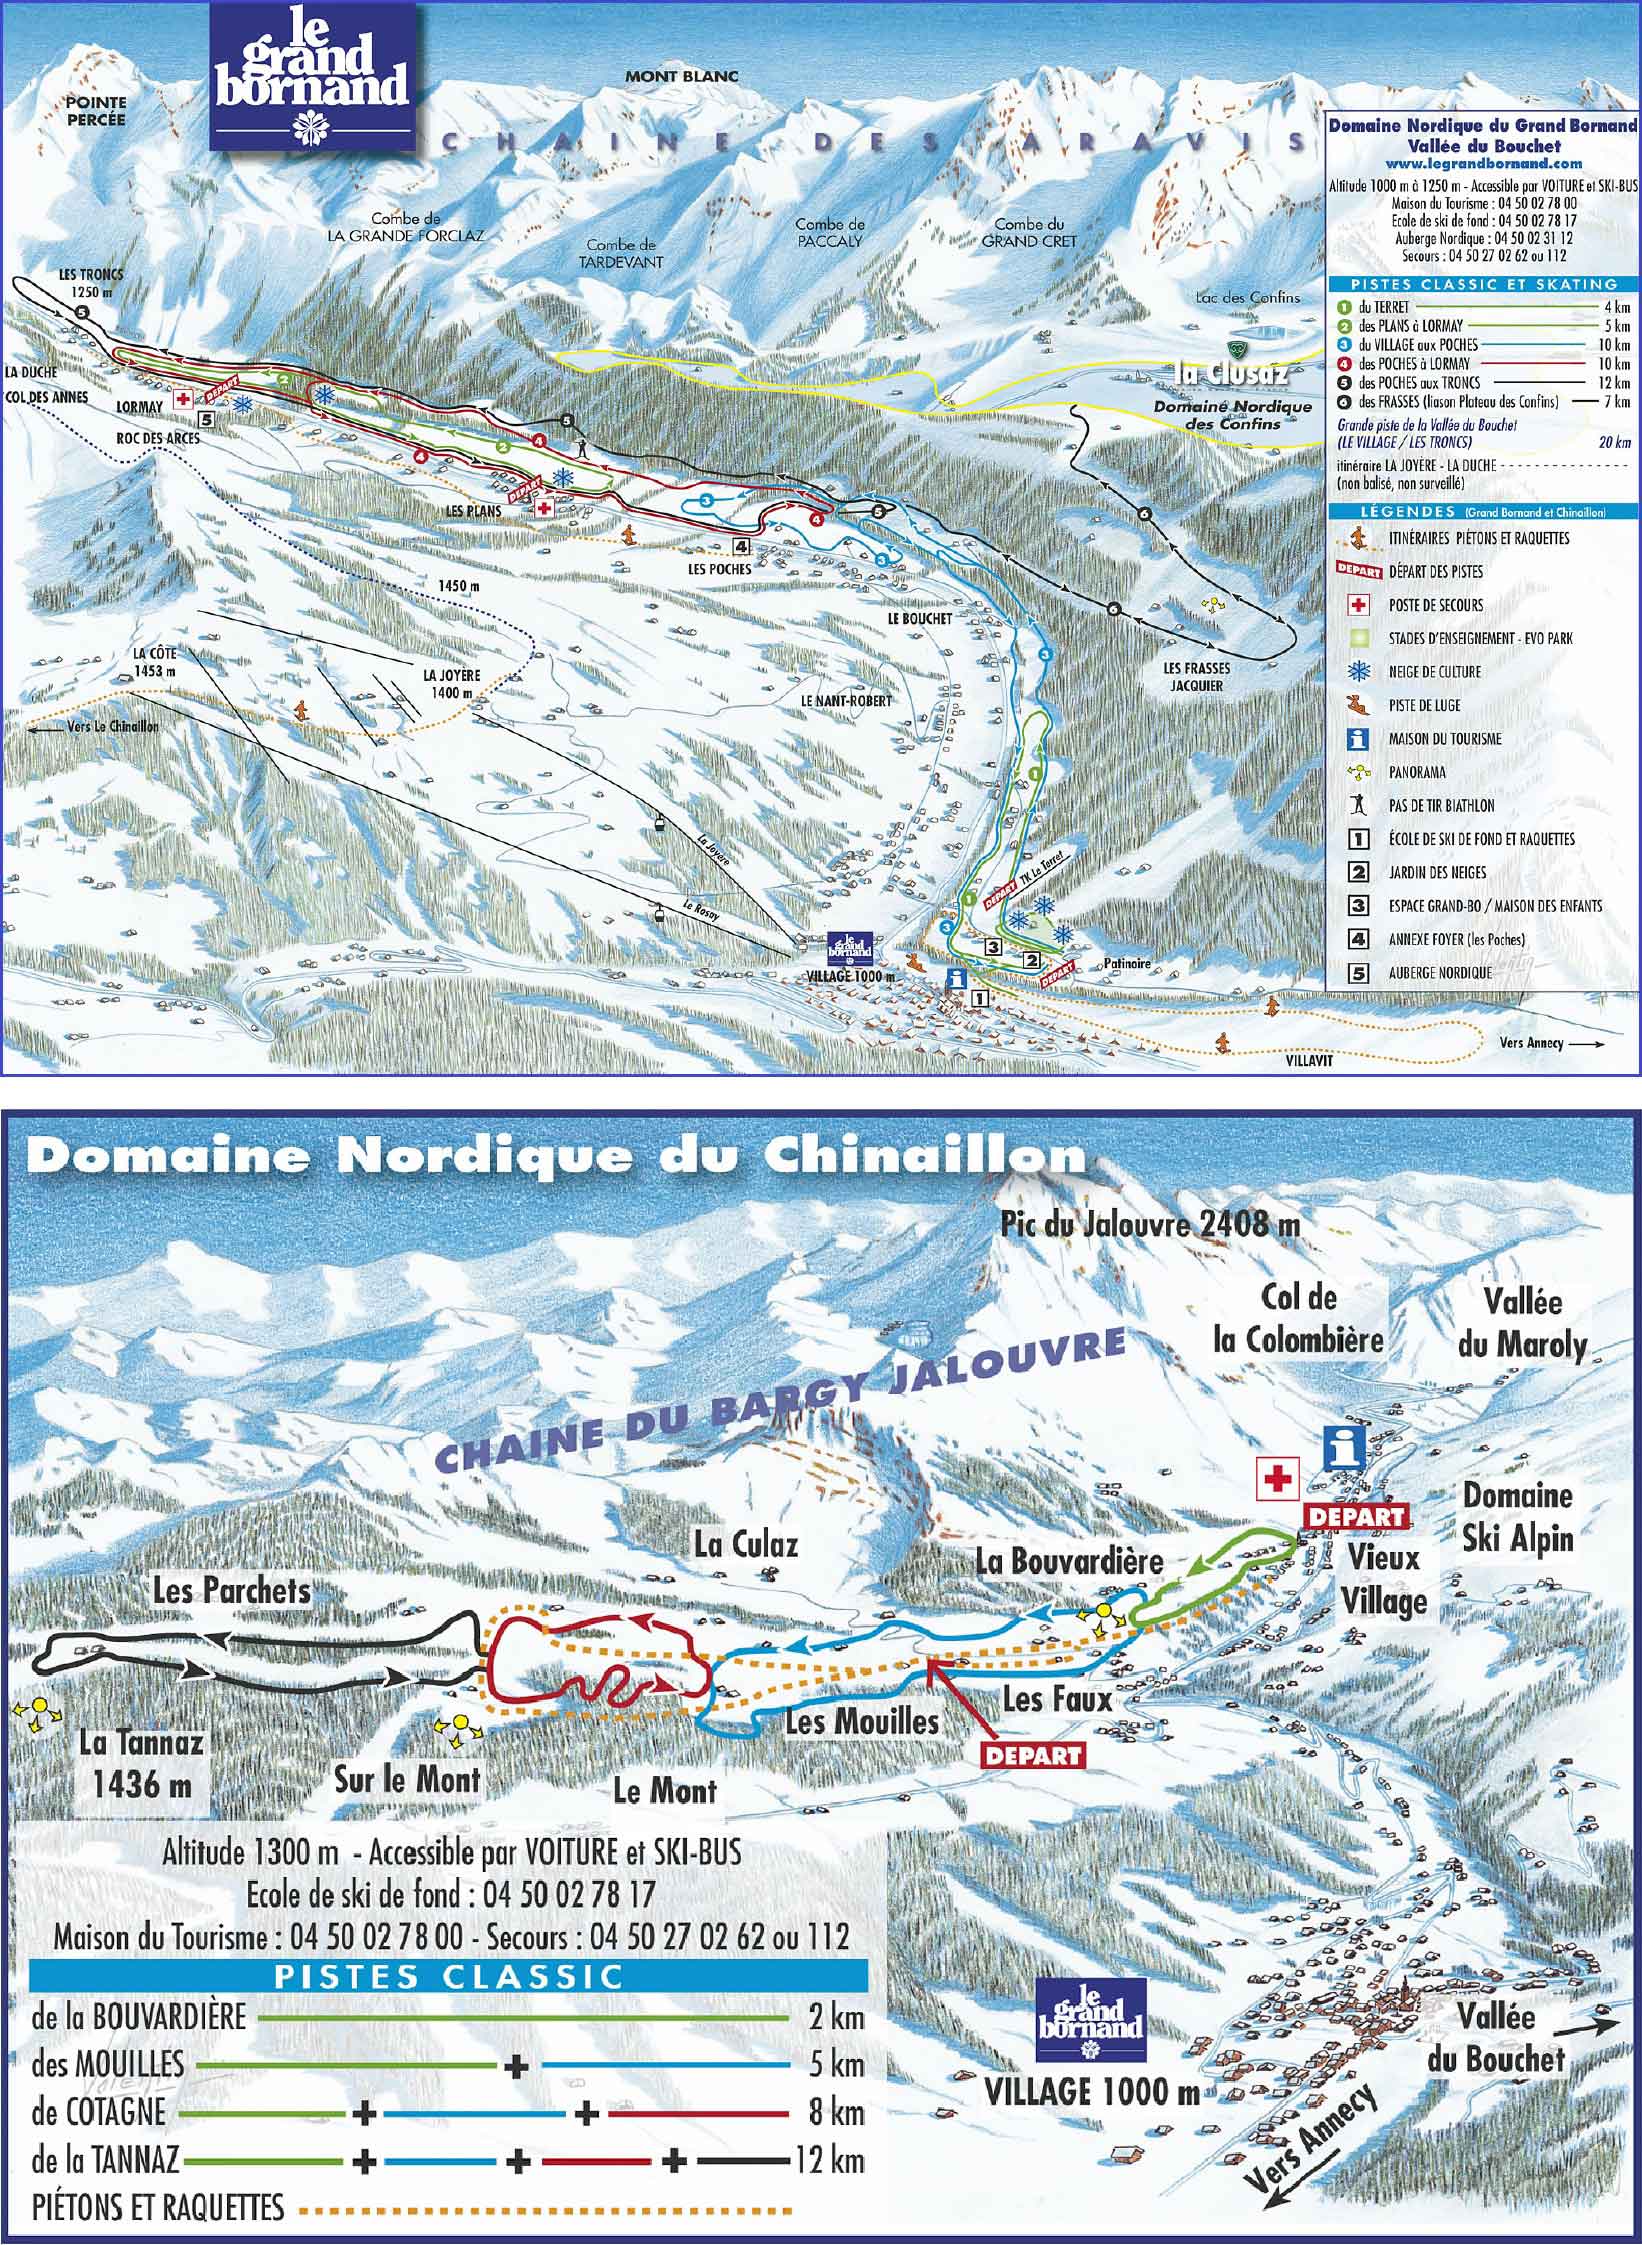 Le Grand Bornand cross-country skiing piste map